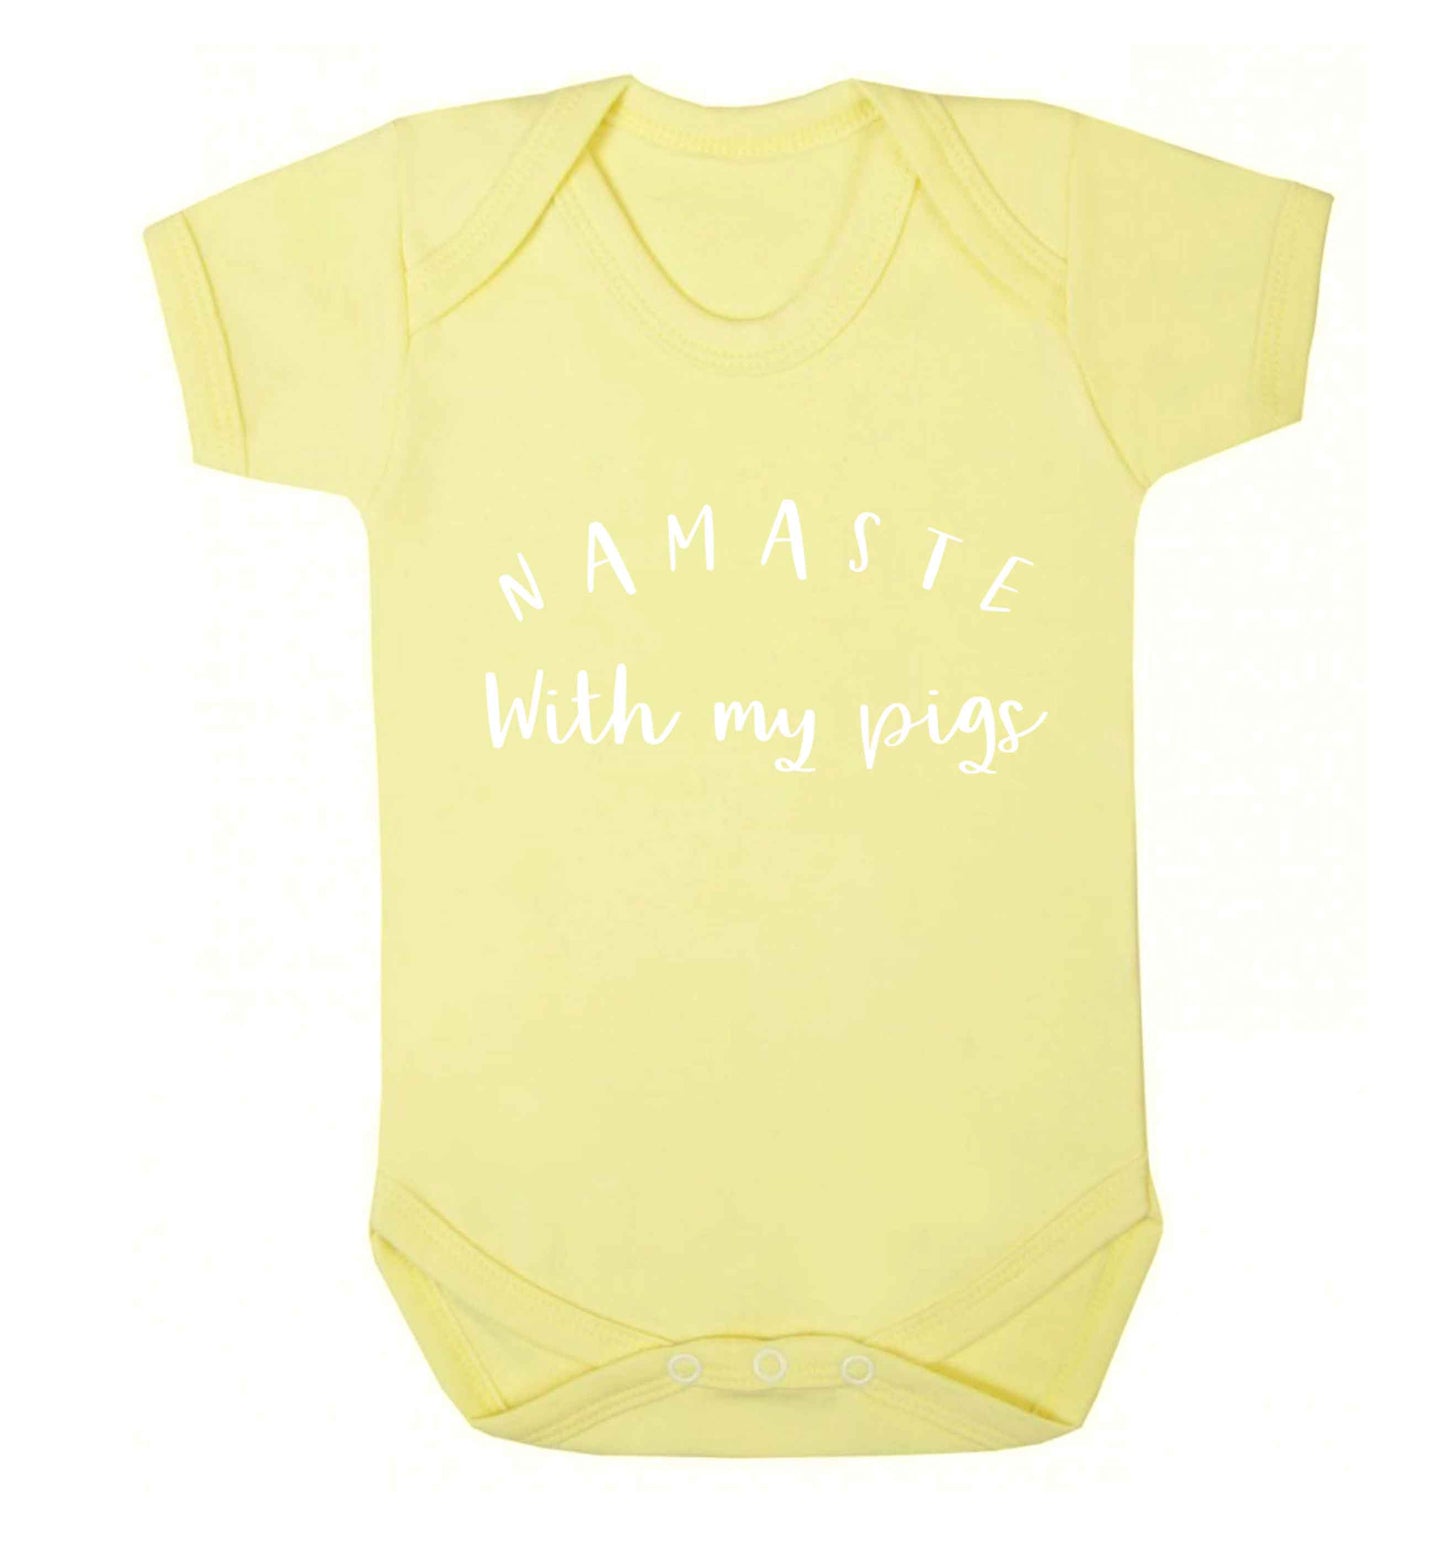 Namaste with my pigs Baby Vest pale yellow 18-24 months